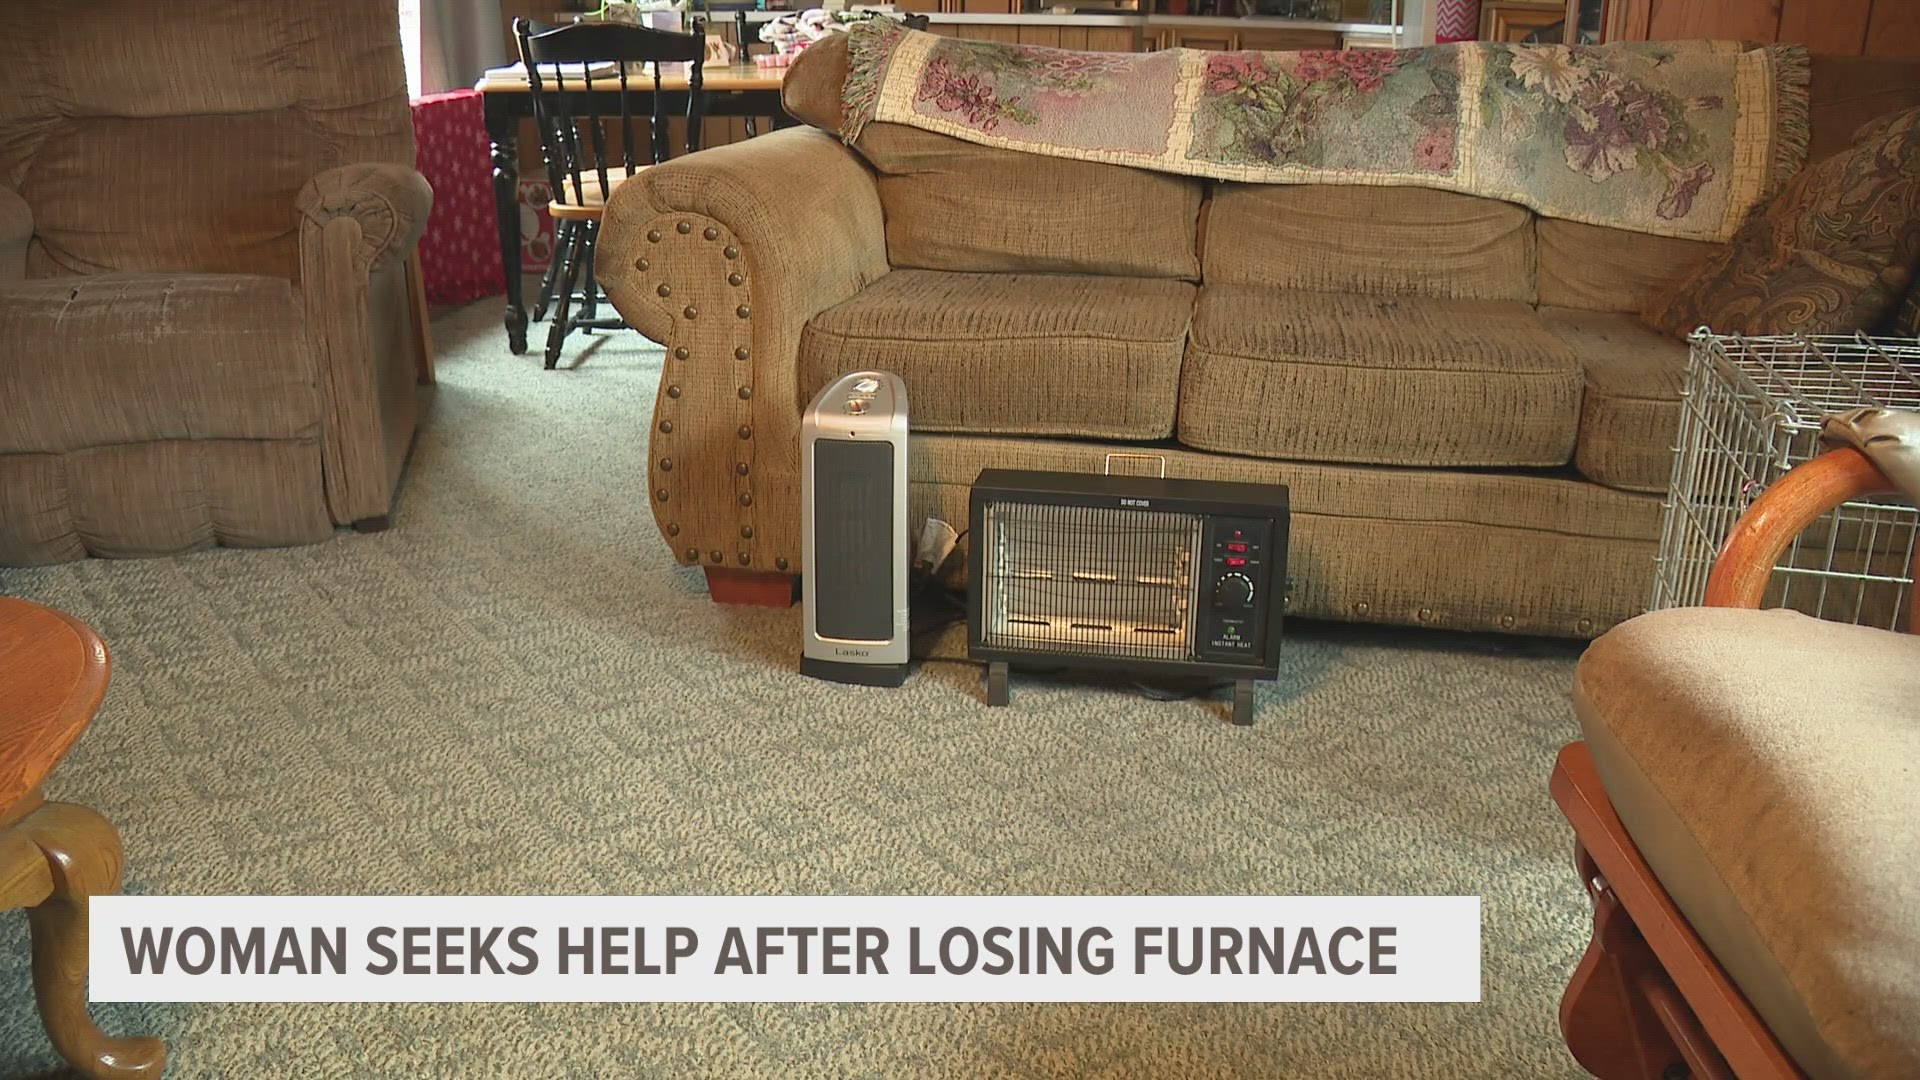 Linda Smalley's aged furnace was struggling to heat her home. It was discovered it was no longer safe to run, but she can't afford a replacement.